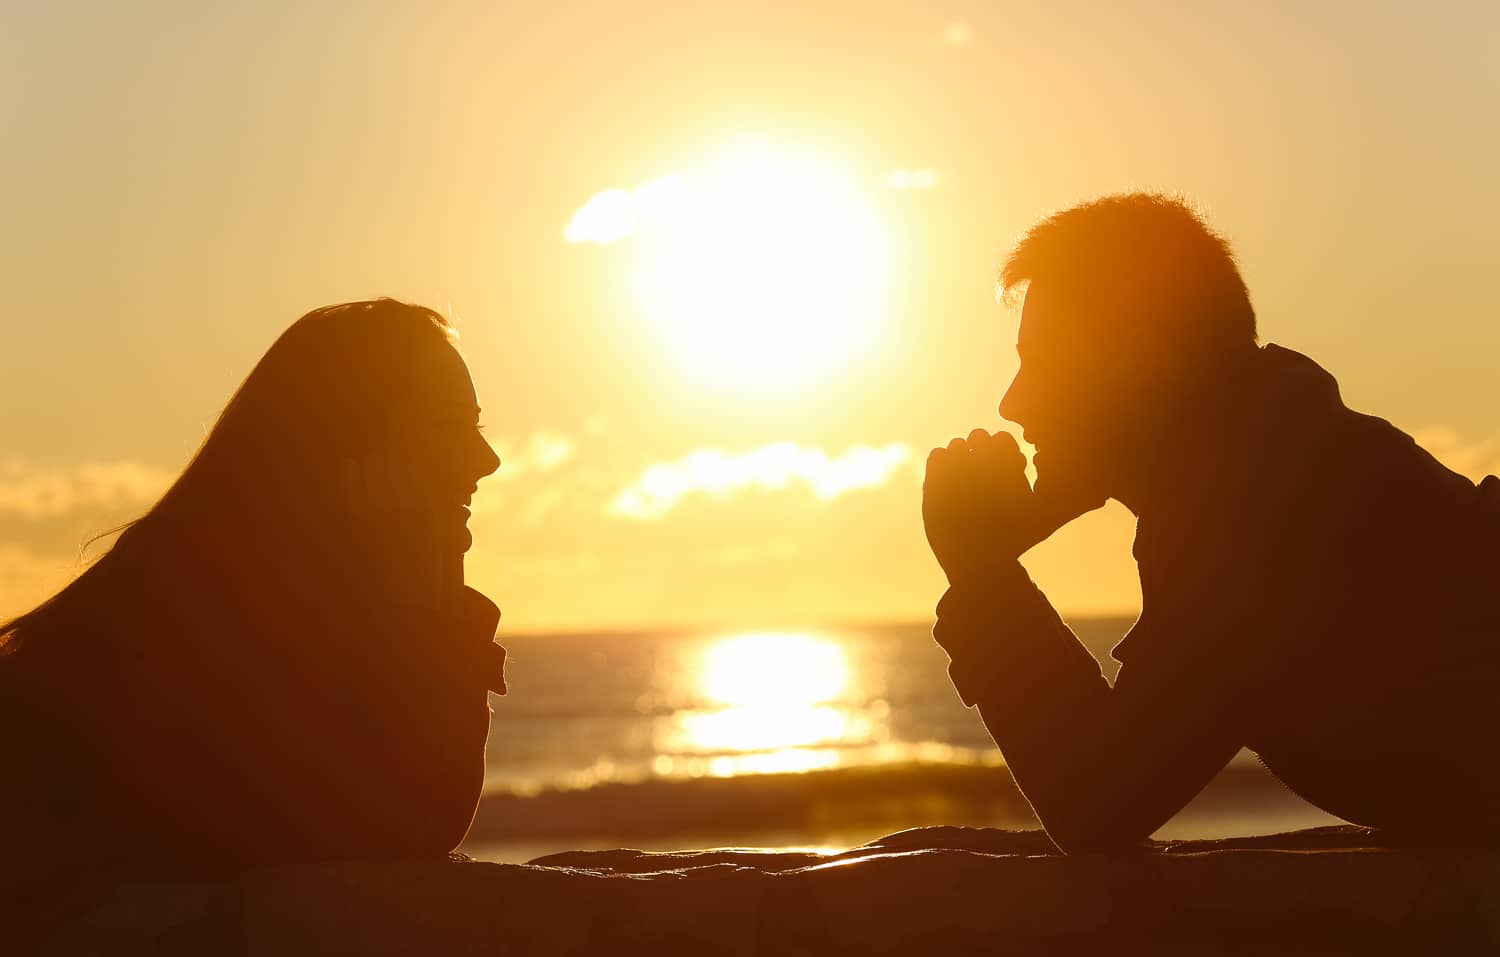 Working from home with loved ones in a pandemic, prioritize communication, listening & dealing with conflicts improves relationships. (image: couple at sunset)